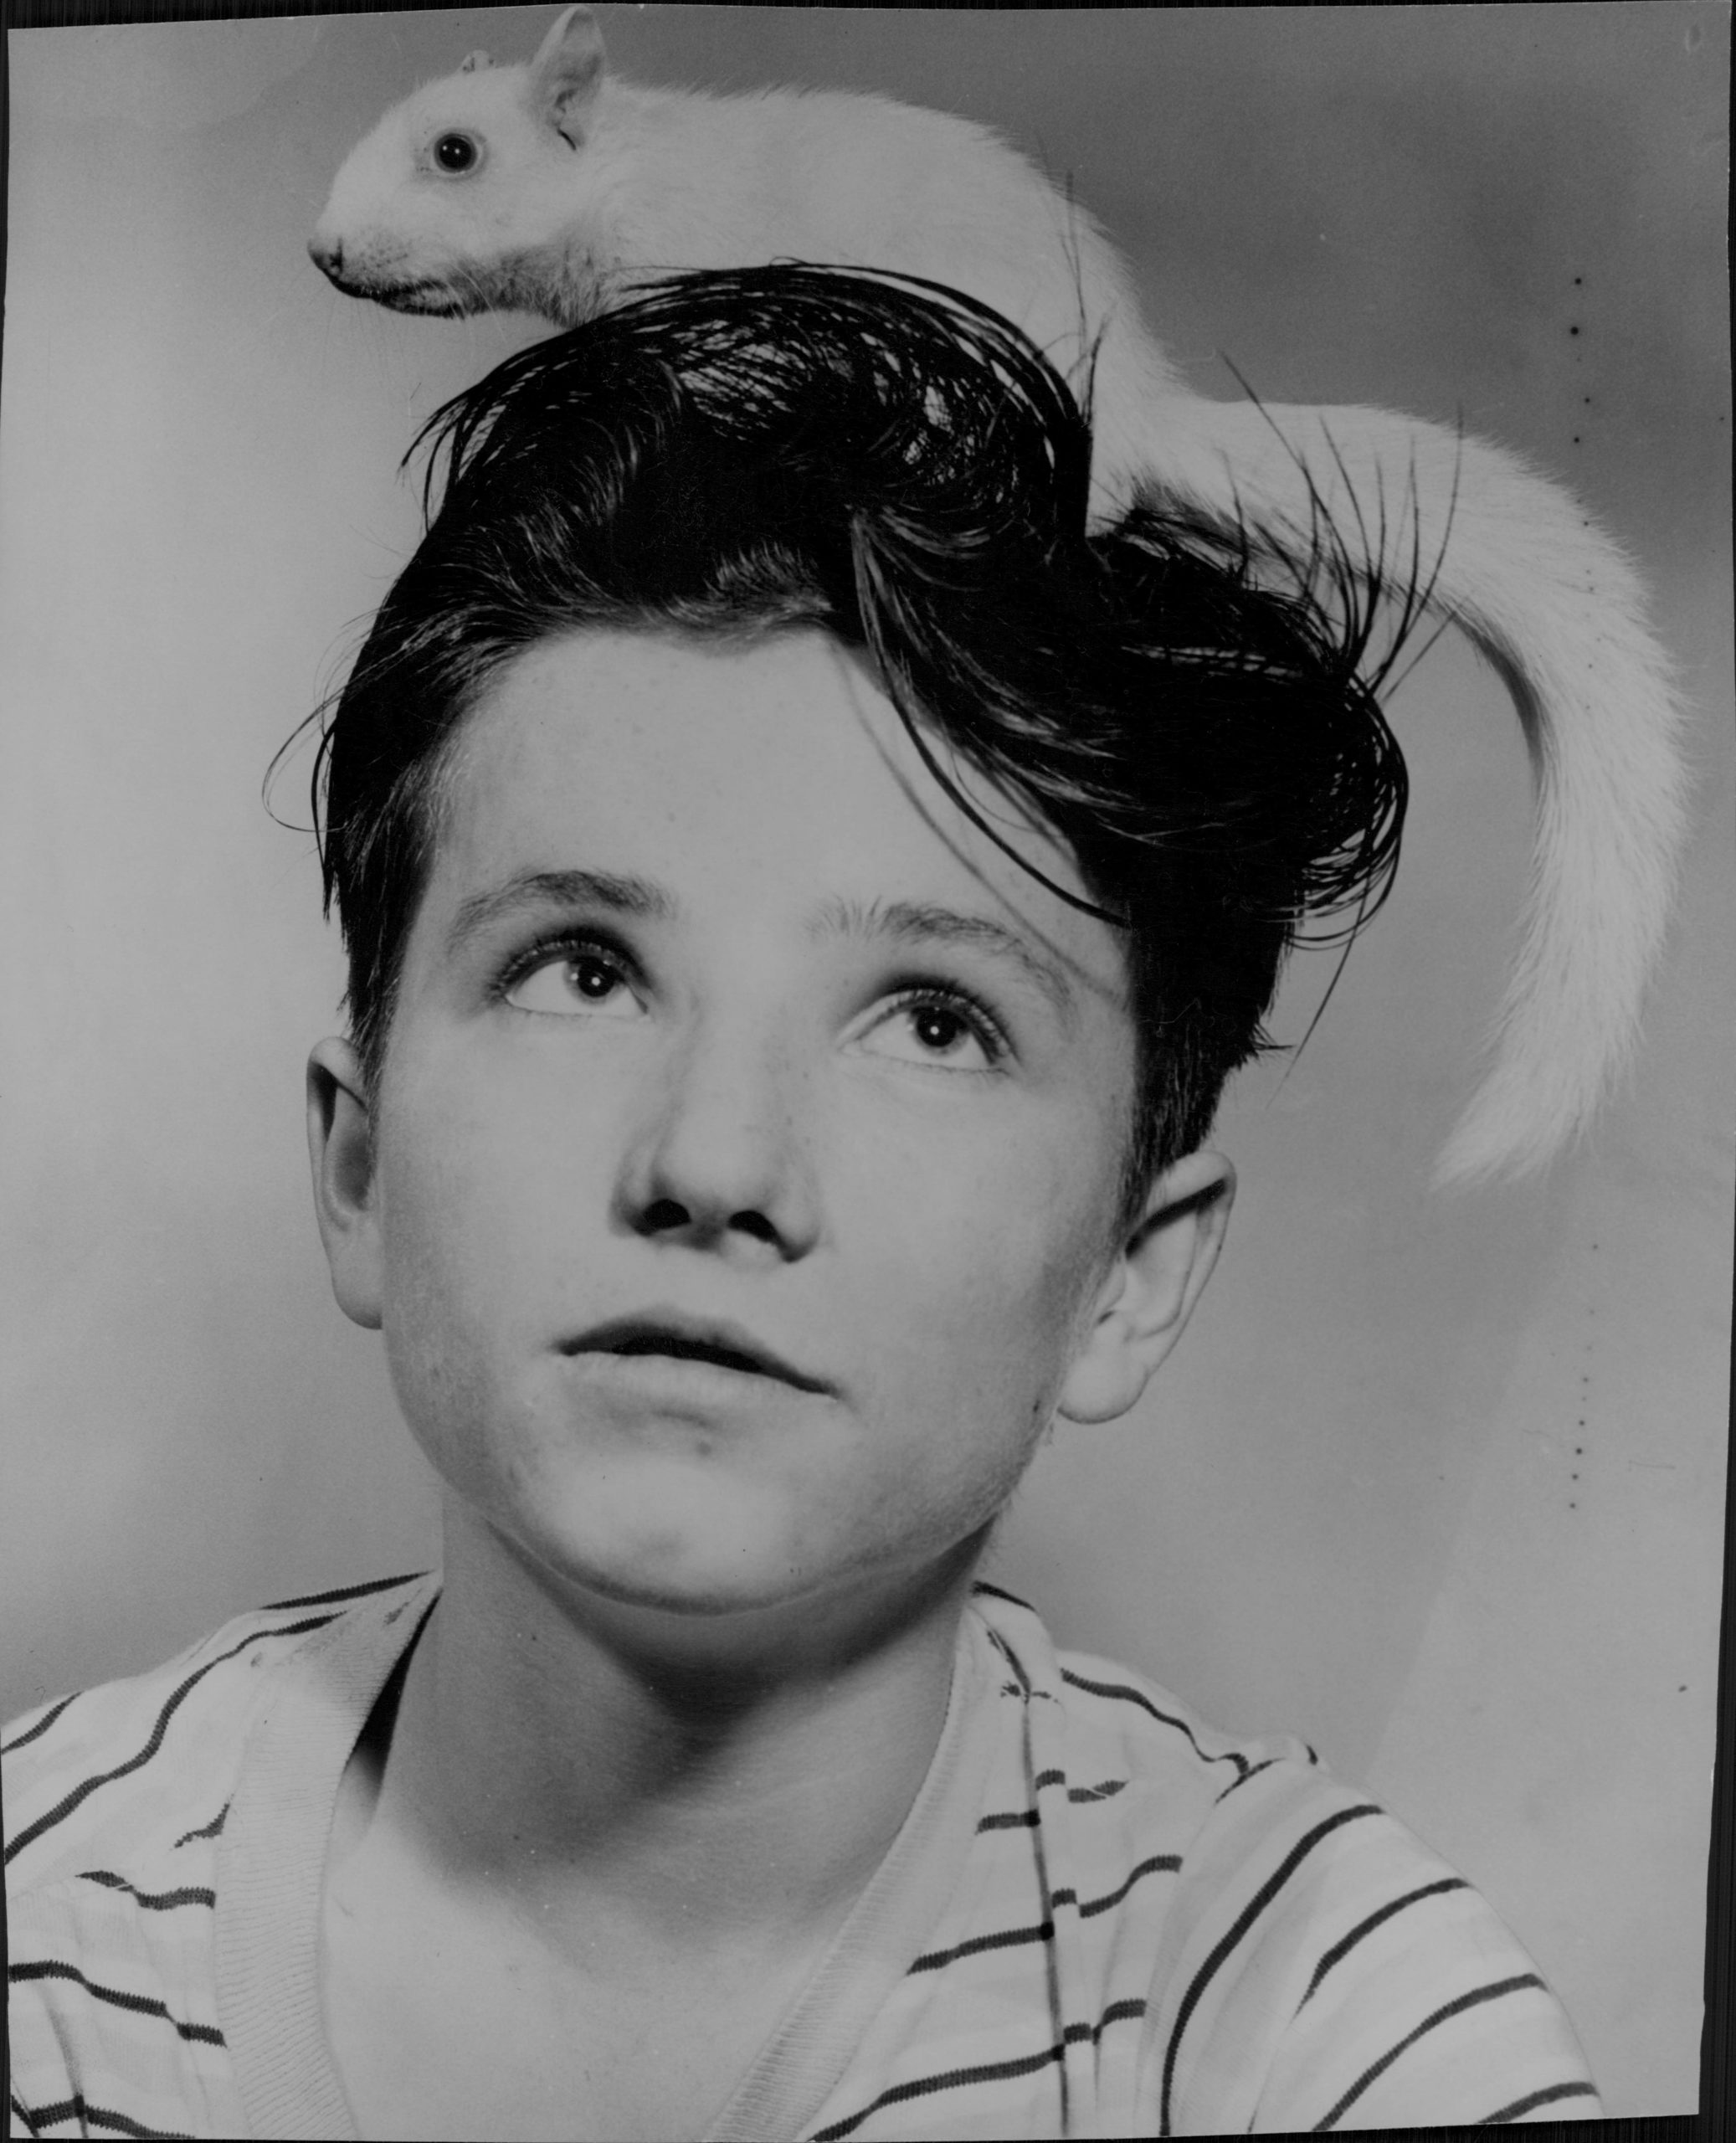 Black and white photo of a boy with an albino squirrel on his head.